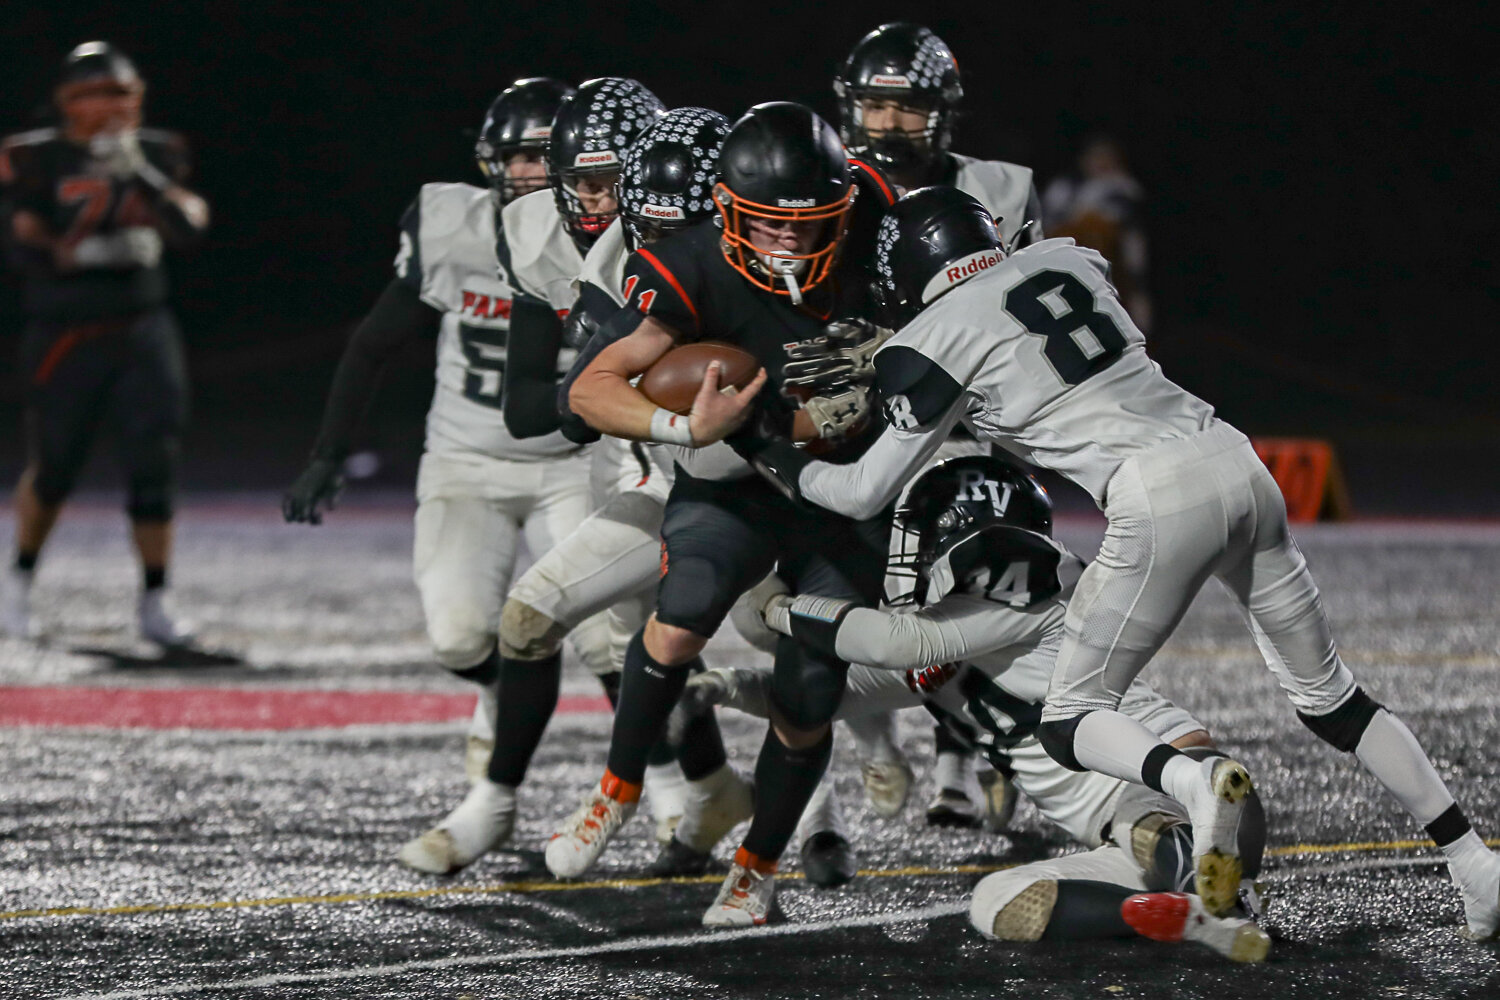 Colin Shields drags the River View secondary down field during a 43-14 Napavine win on Nov. 18.